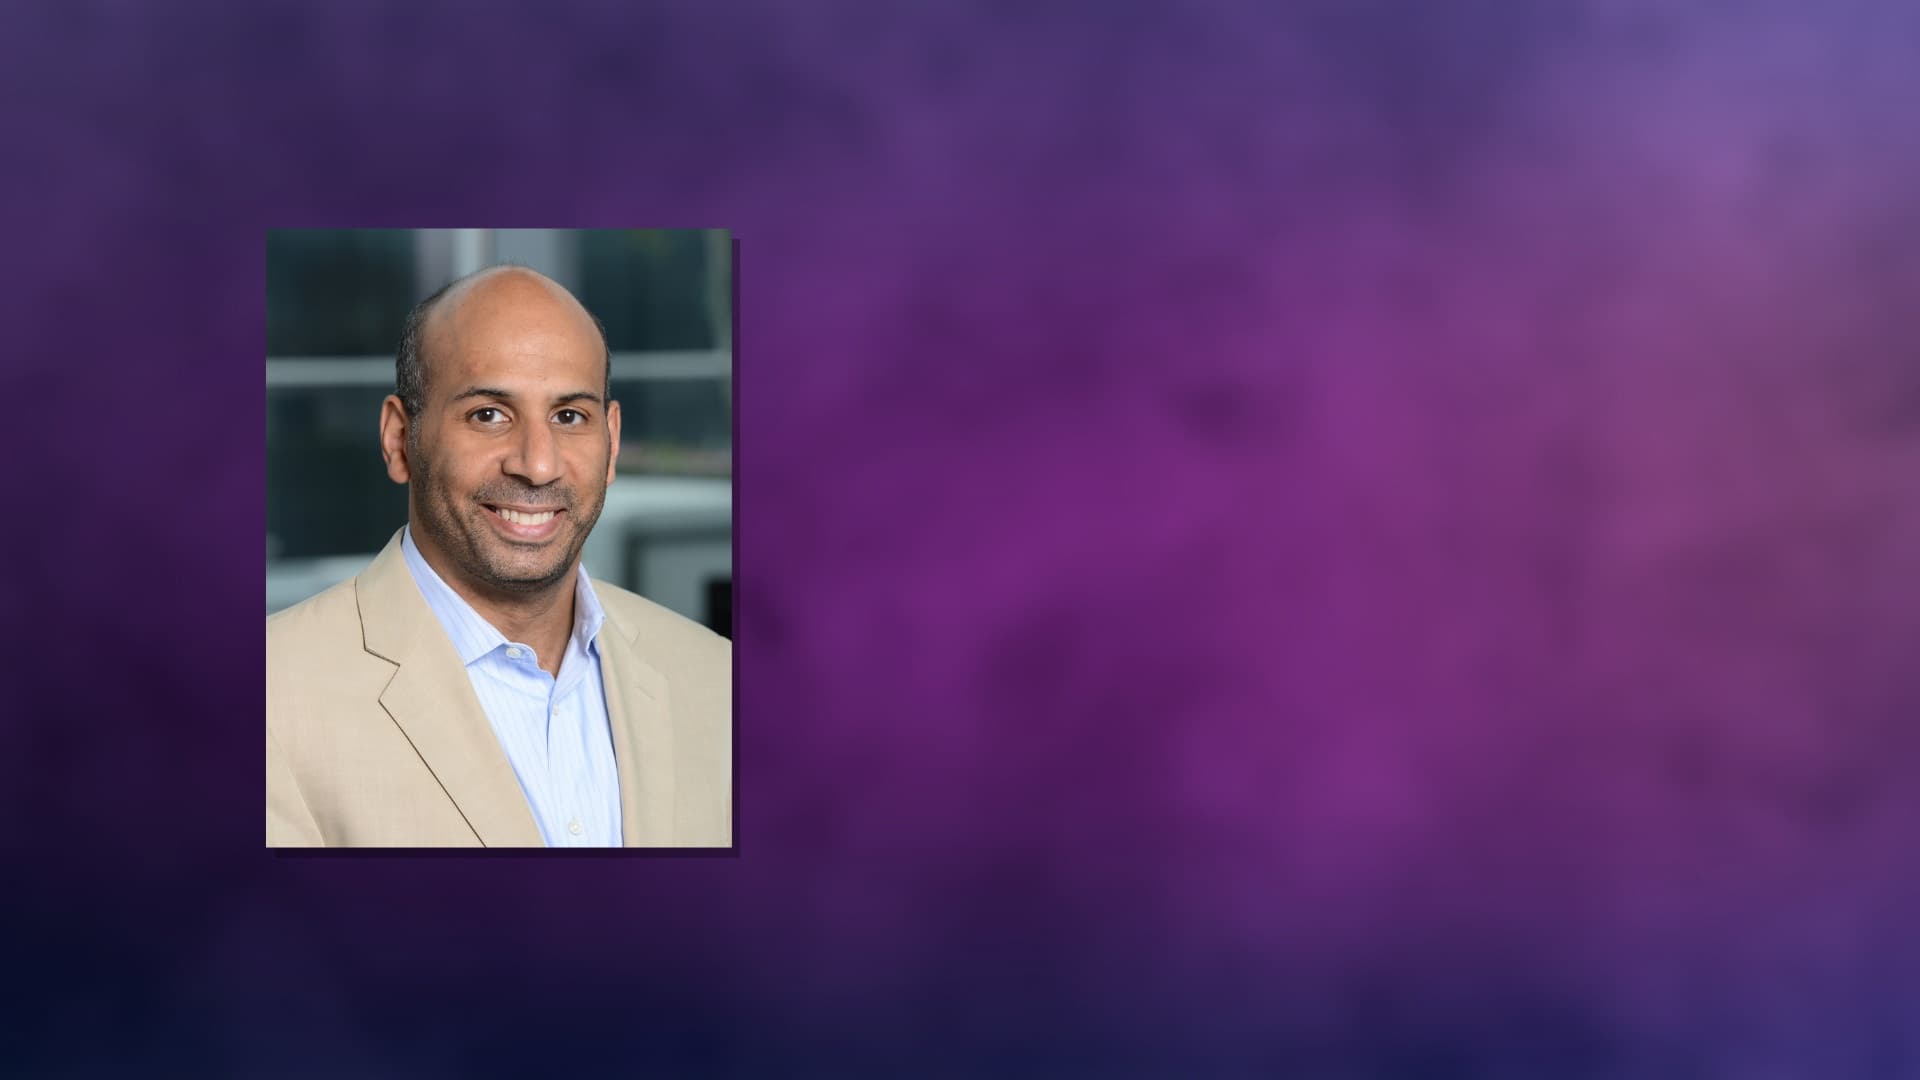 Headshot of Marco A. Davis, President and CEO of the Congressional Hispanic Caucus Institute (CHCI) on a purple background